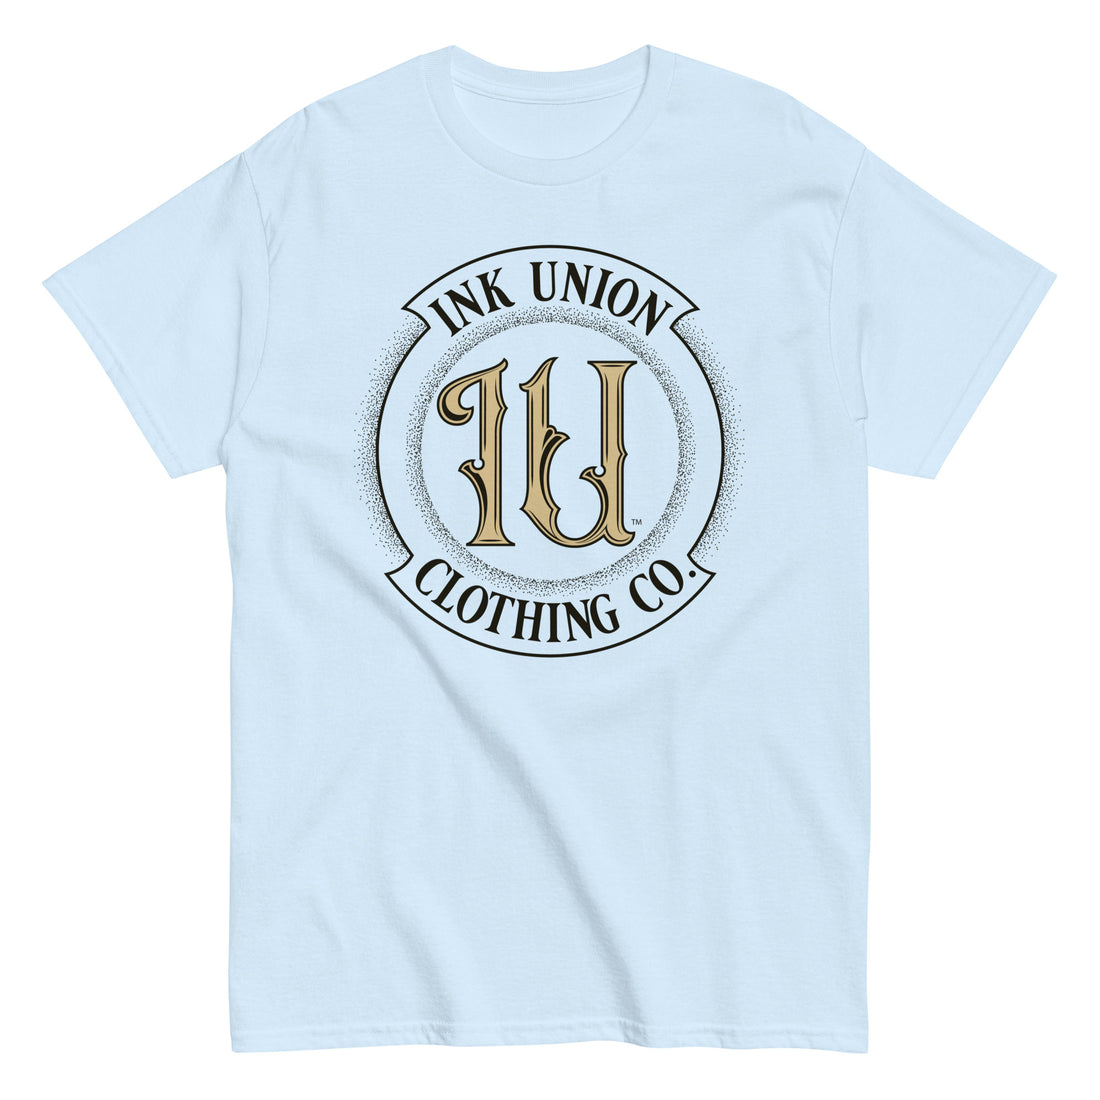 A light blue t-shirt with the Ink Union Clothing Co Badge logo in black and gold centered on the front of the shirt.